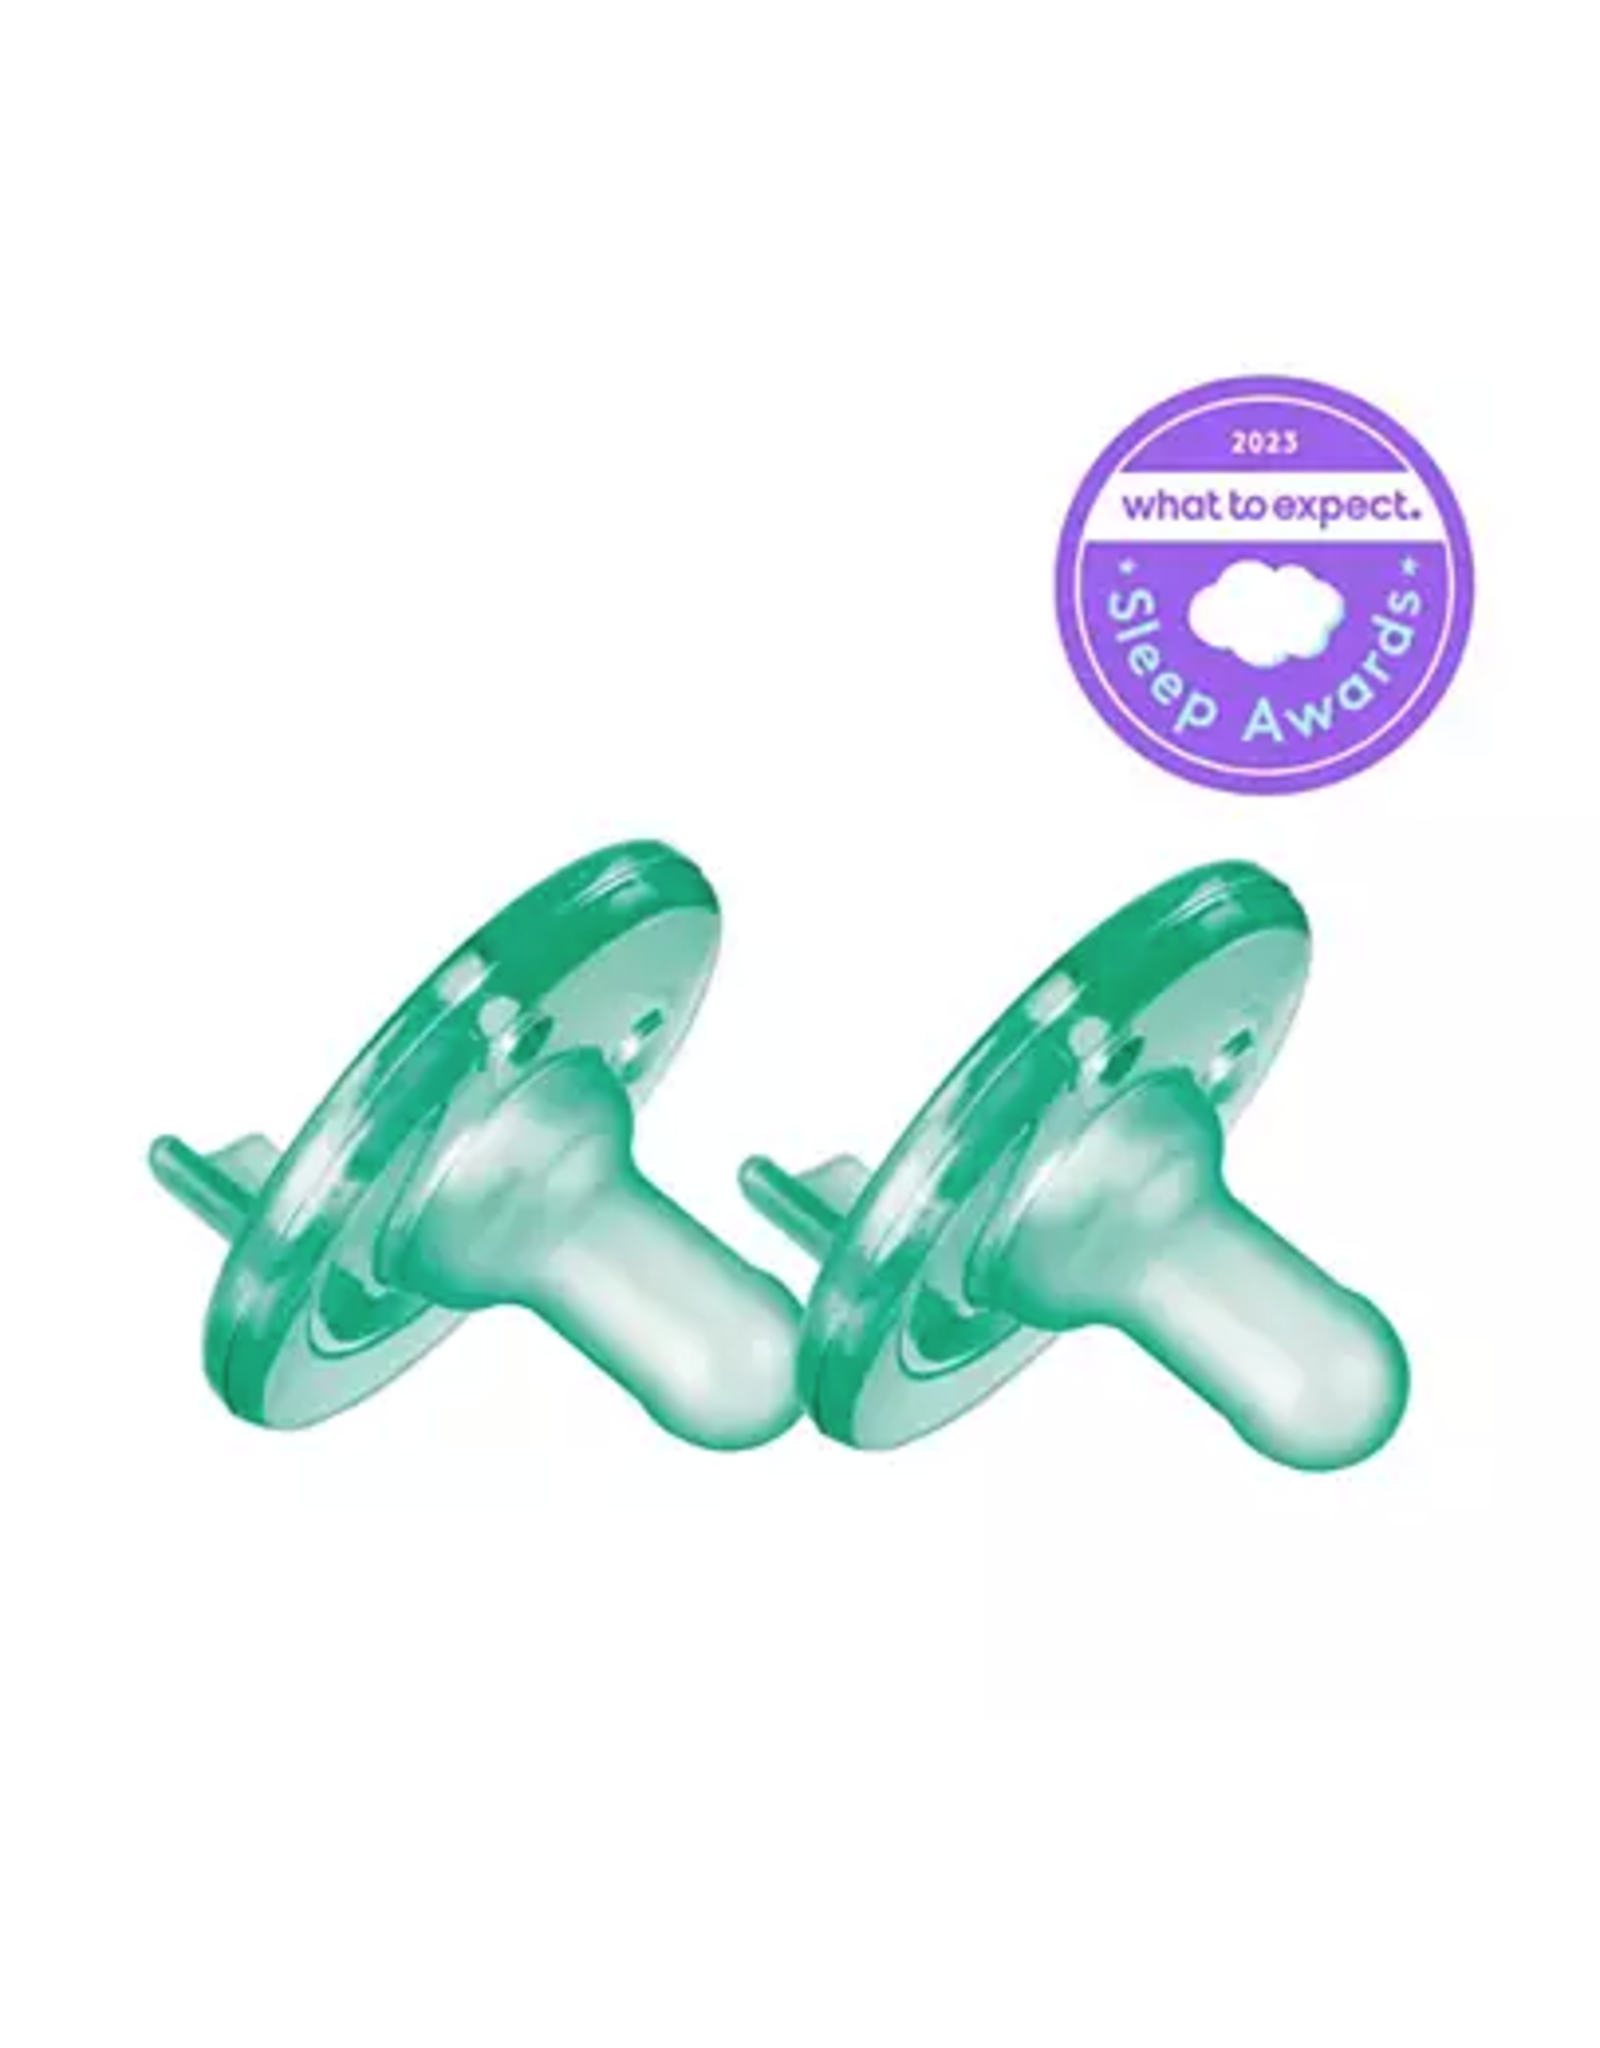 Philips AVENT Philips Avent Soothie Pacifier 3m+